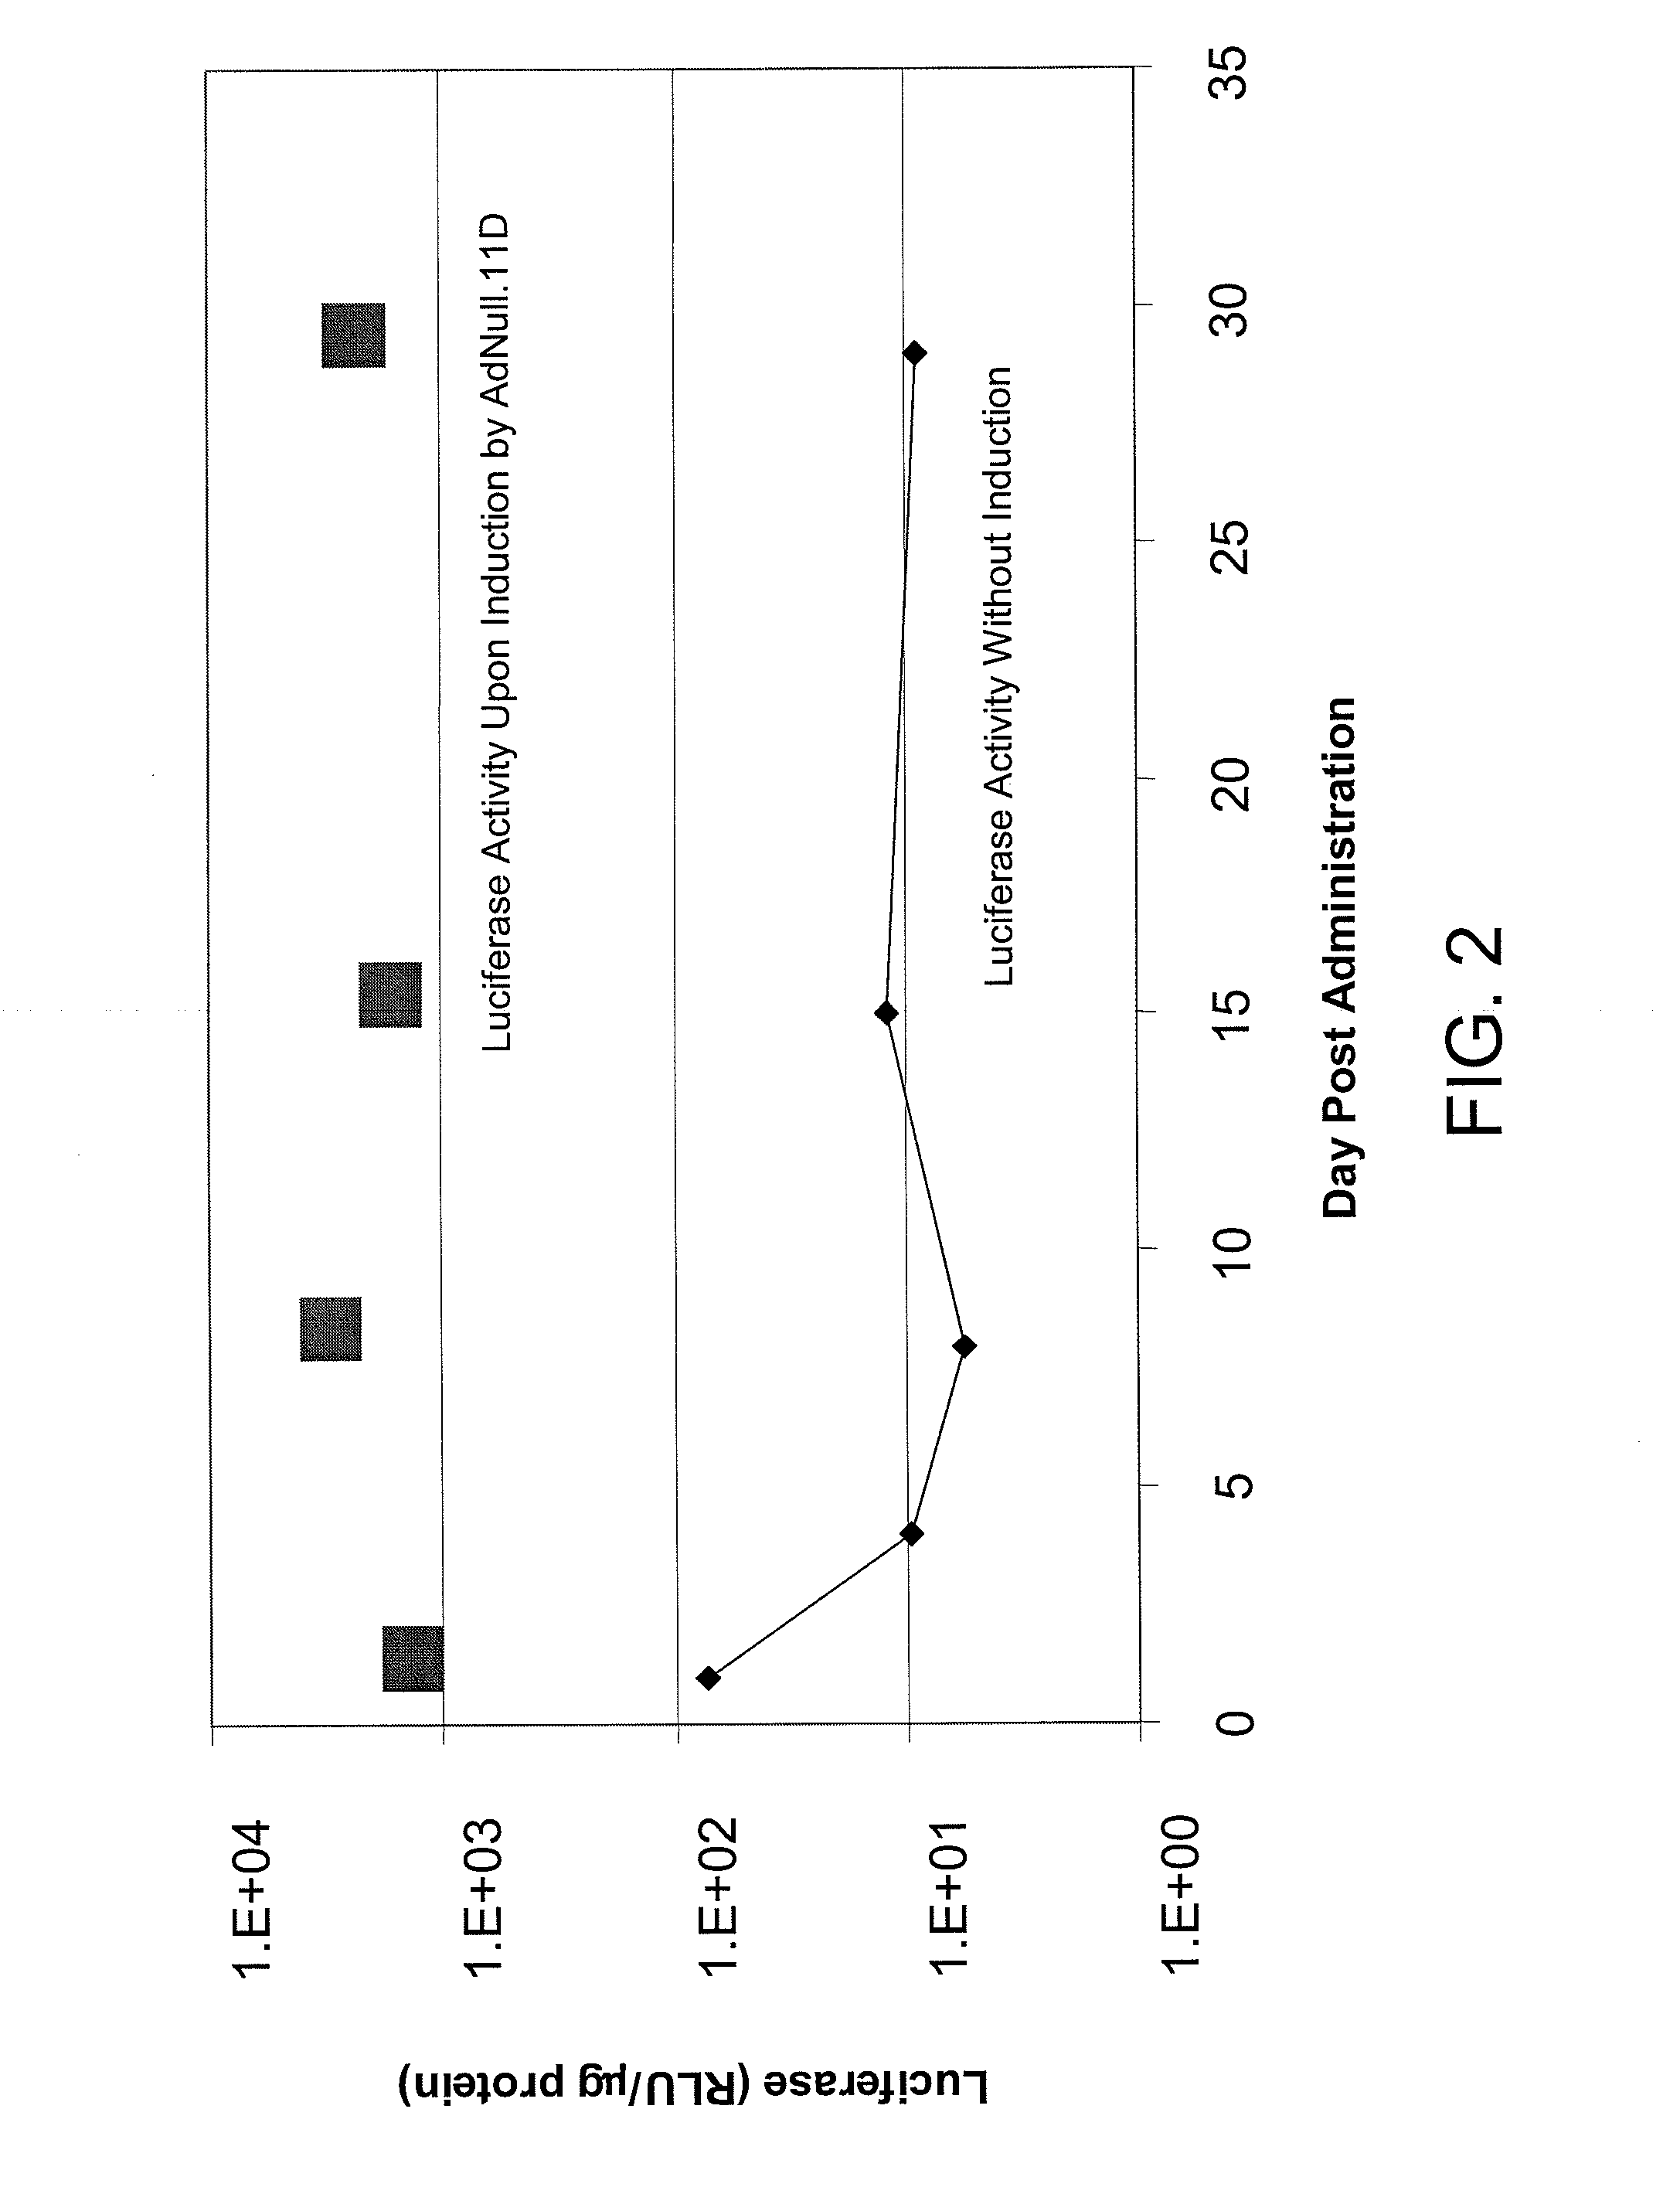 Materials and methods for treating ocular-related disorders